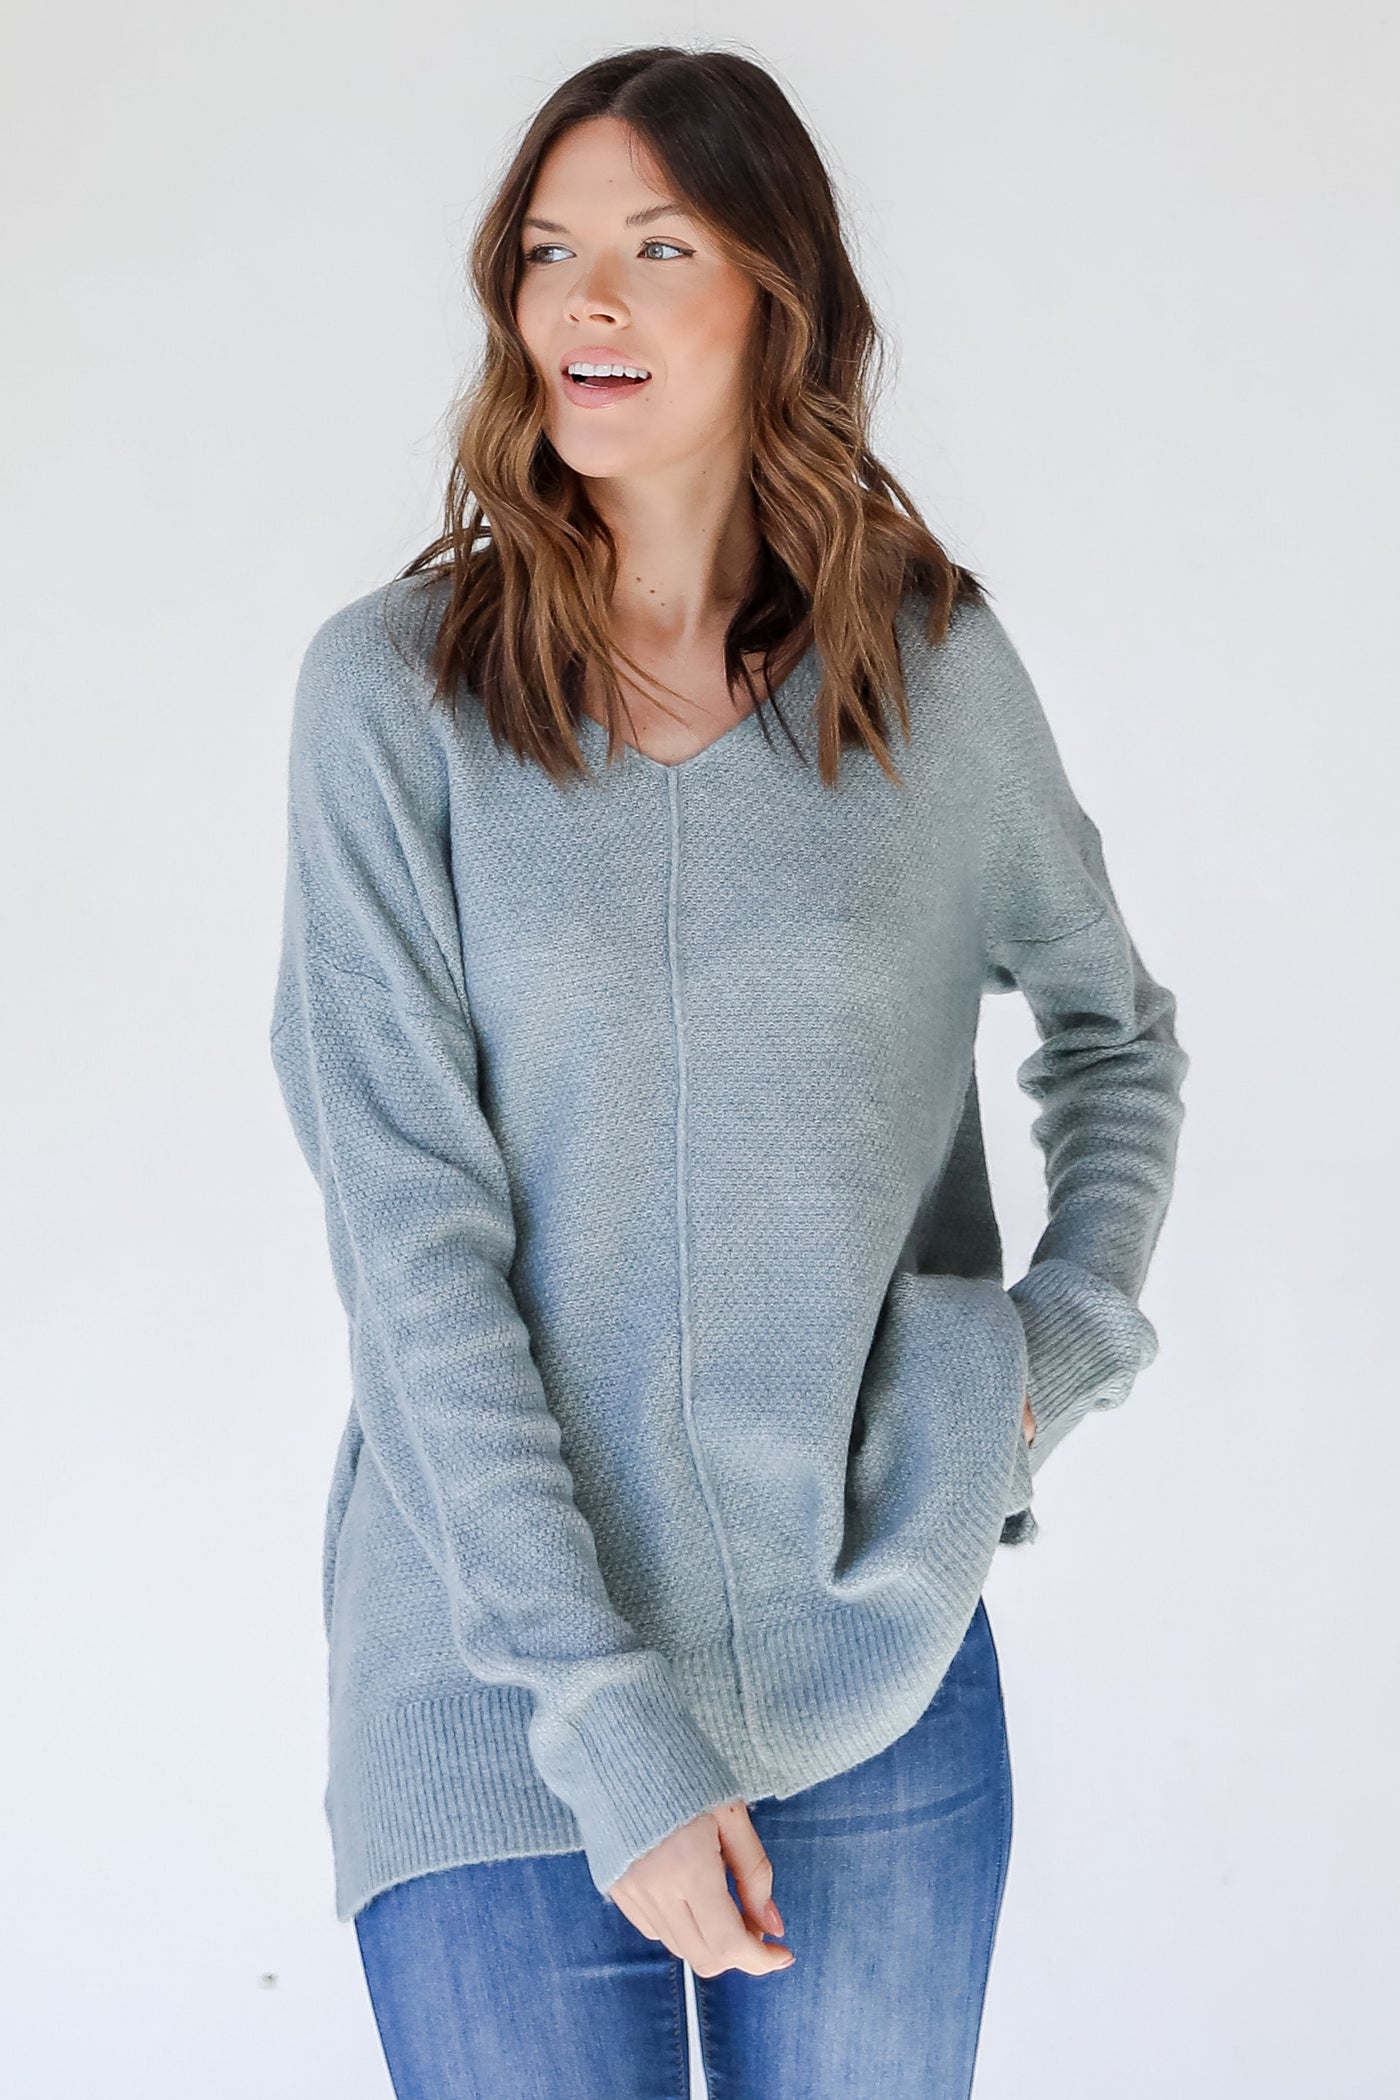 Oversized Sweater in light blue front view